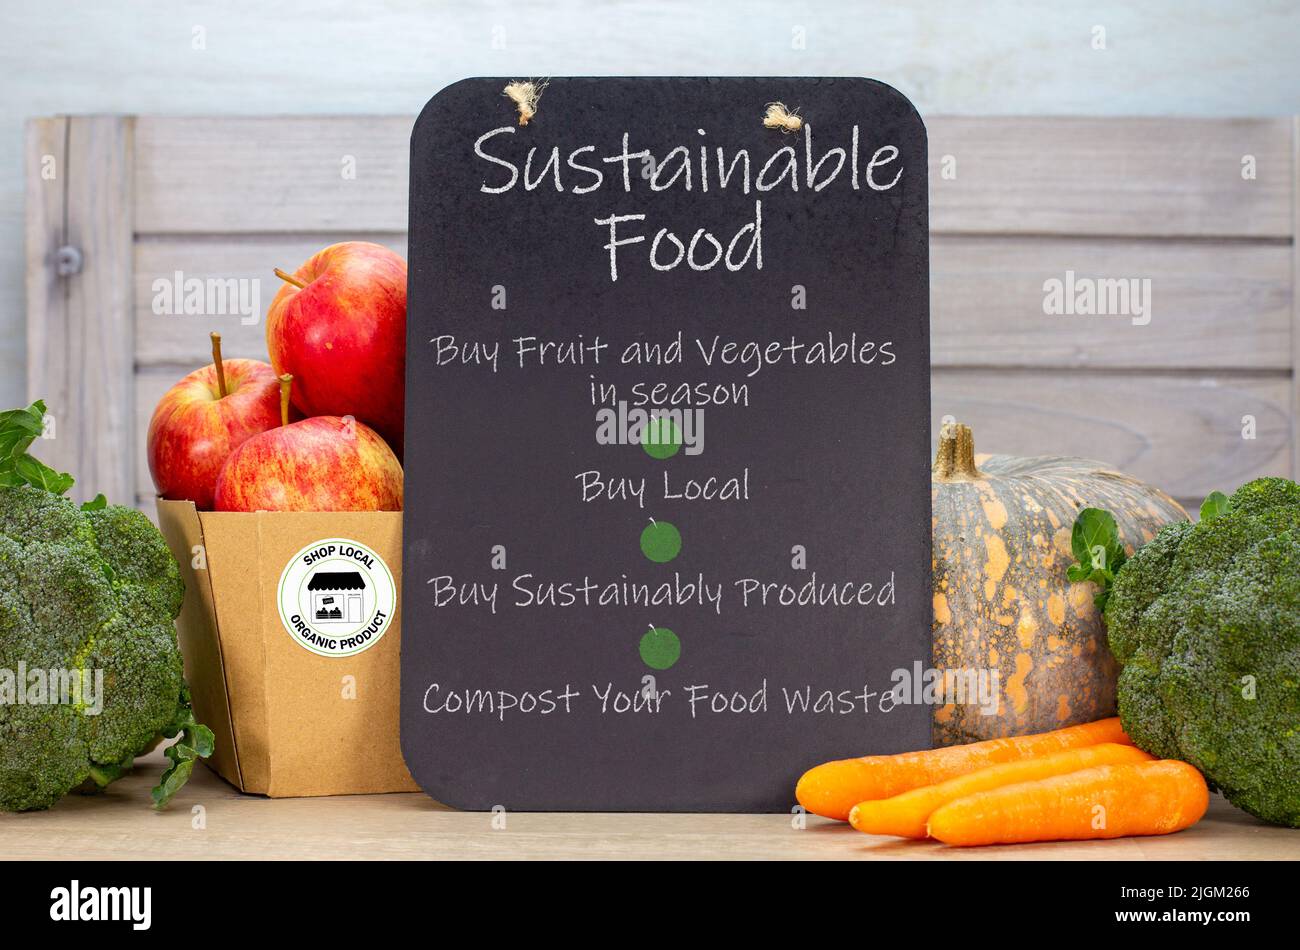 Chalkboard with Sustainable food heading and list of ways eat sustainably, sustainable living and ethical consumerism. Stock Photo